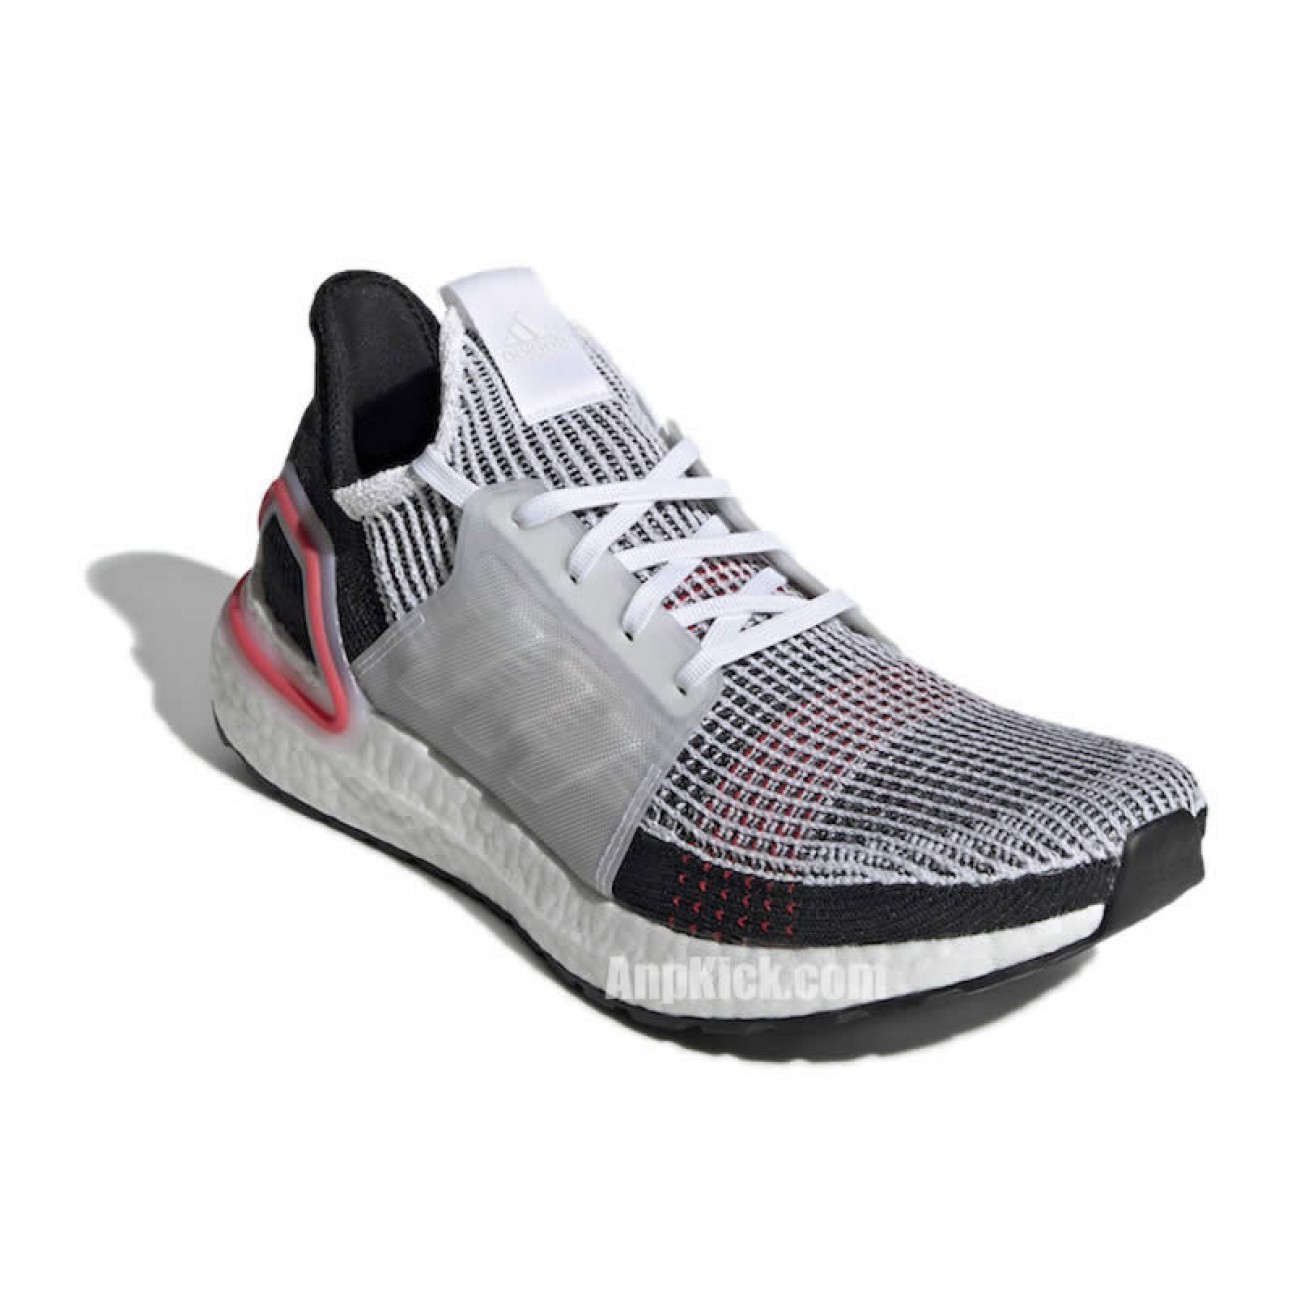 adidas Ultra Boost 2019 Colorways "Active Red / Cloud White" B37703